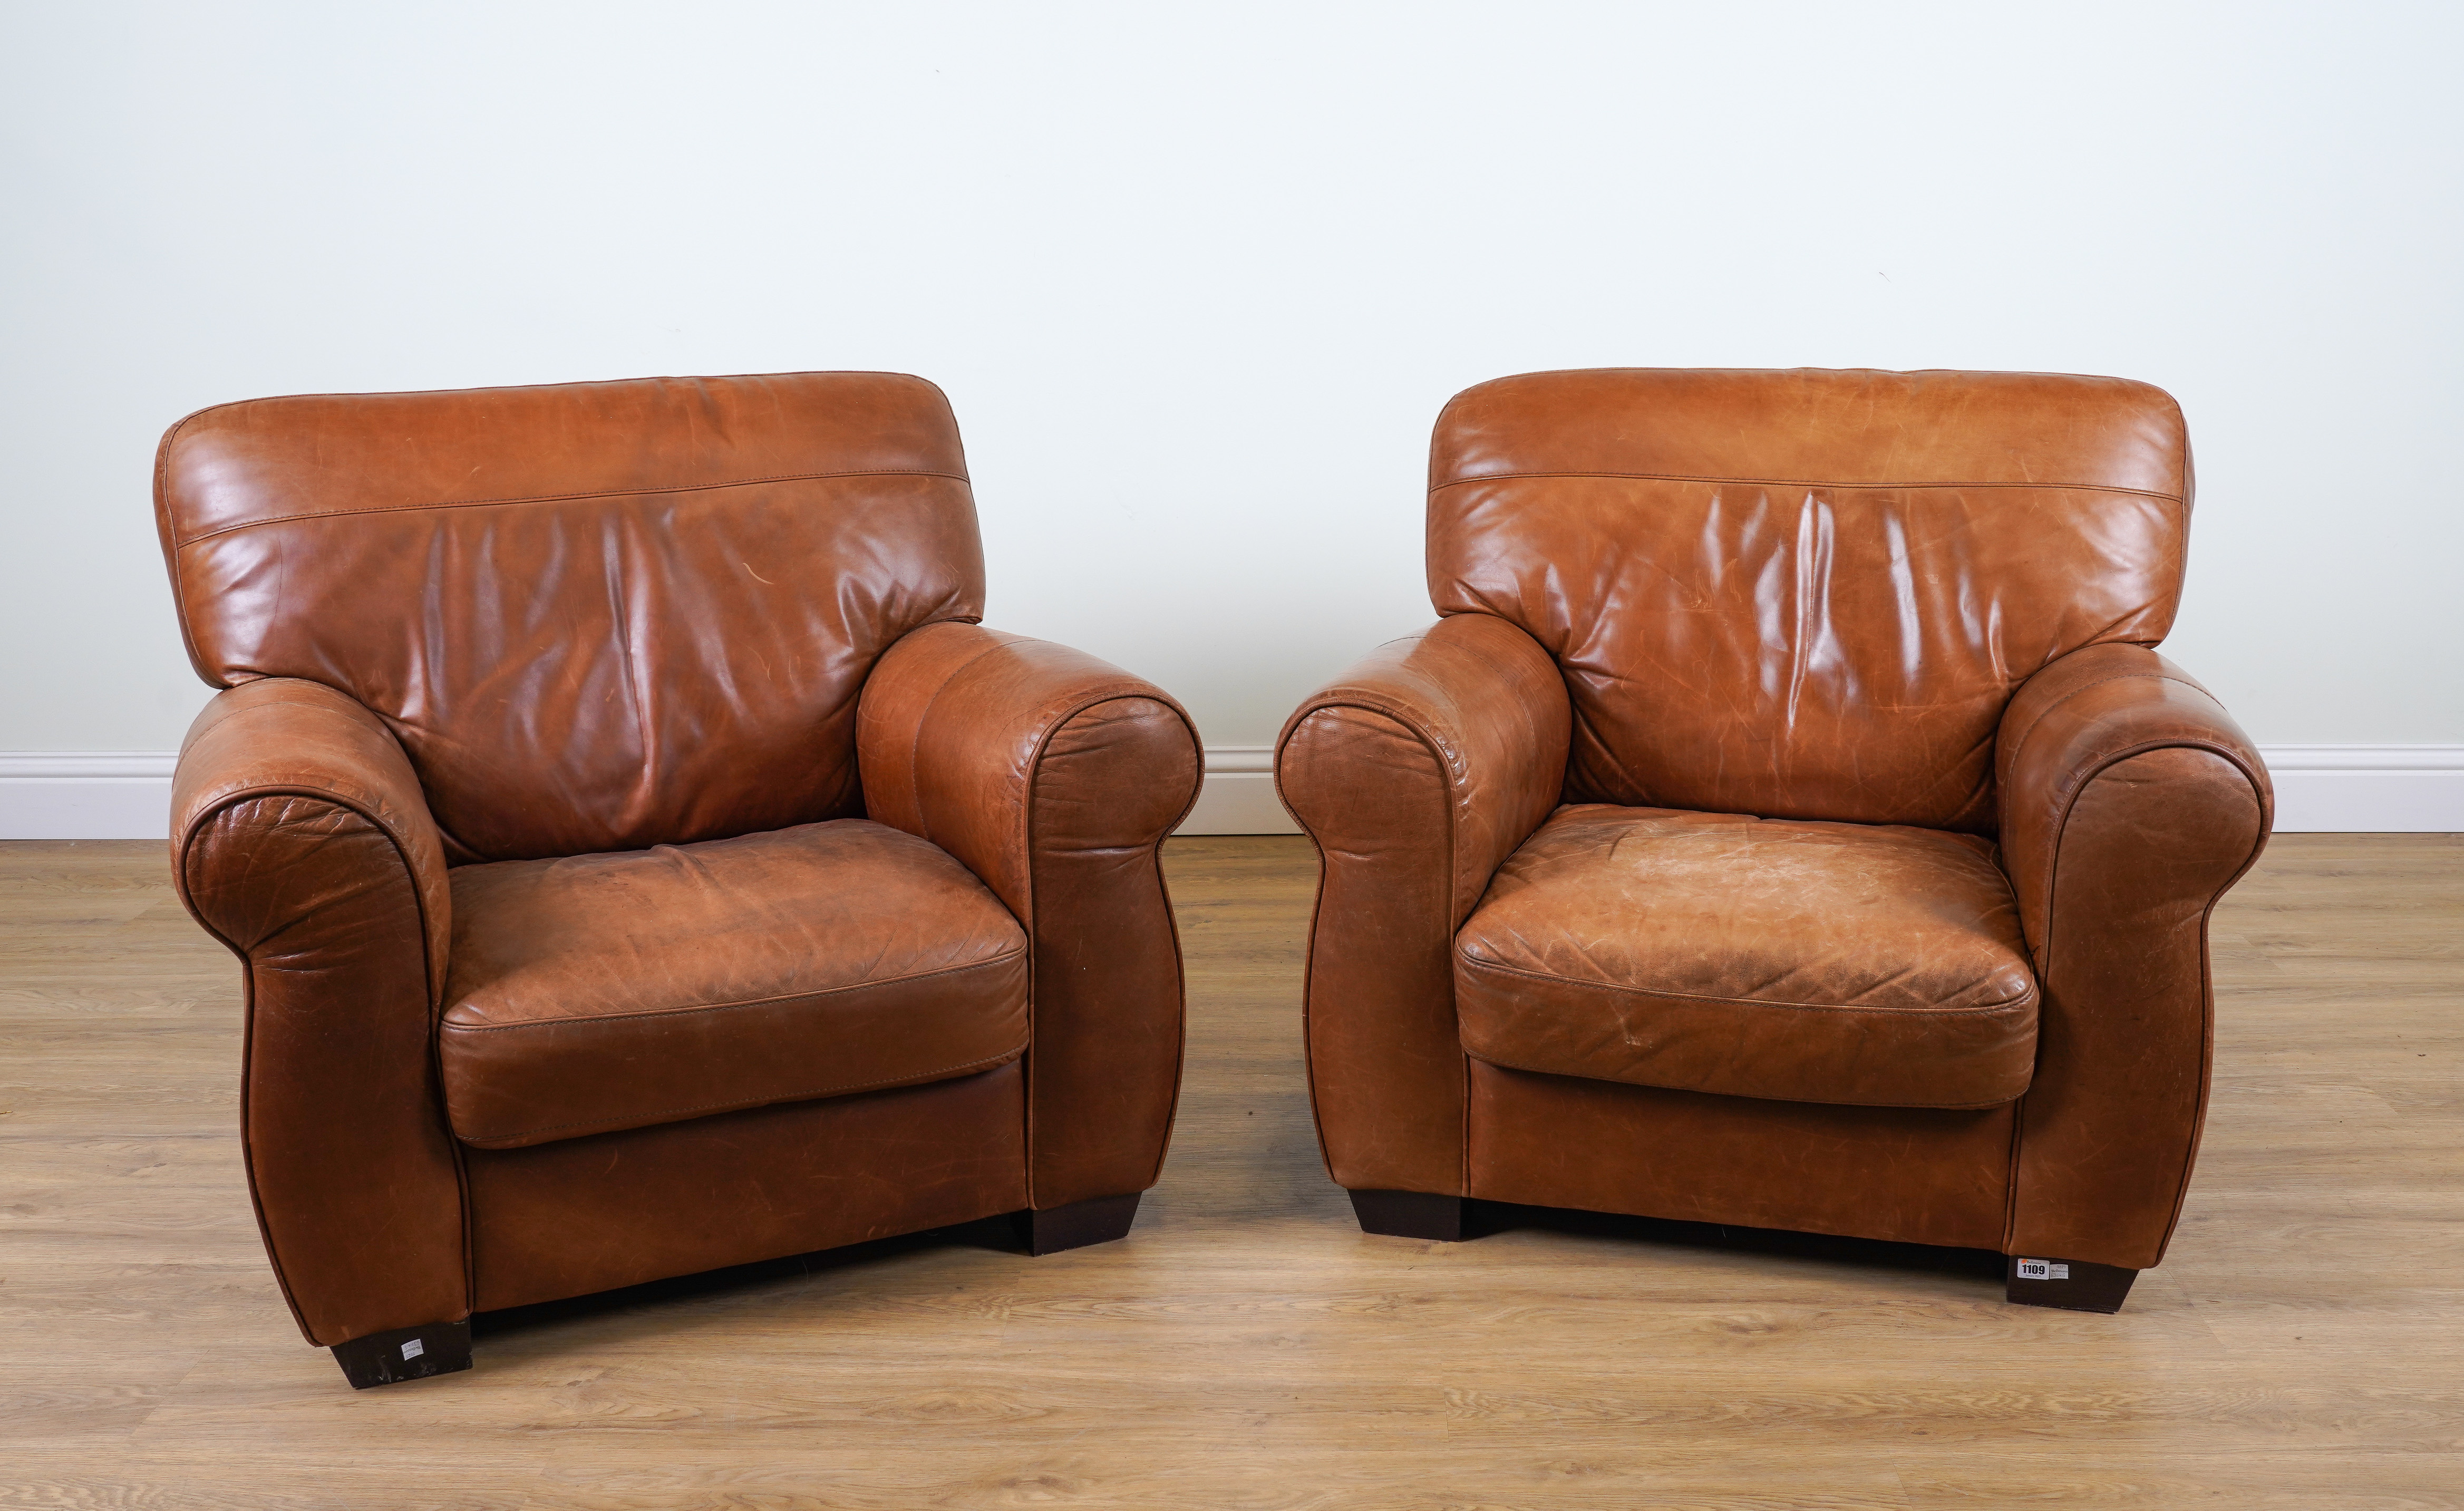 A PAIR OF 20TH CENTURY TAN LEATHER 3ae54e